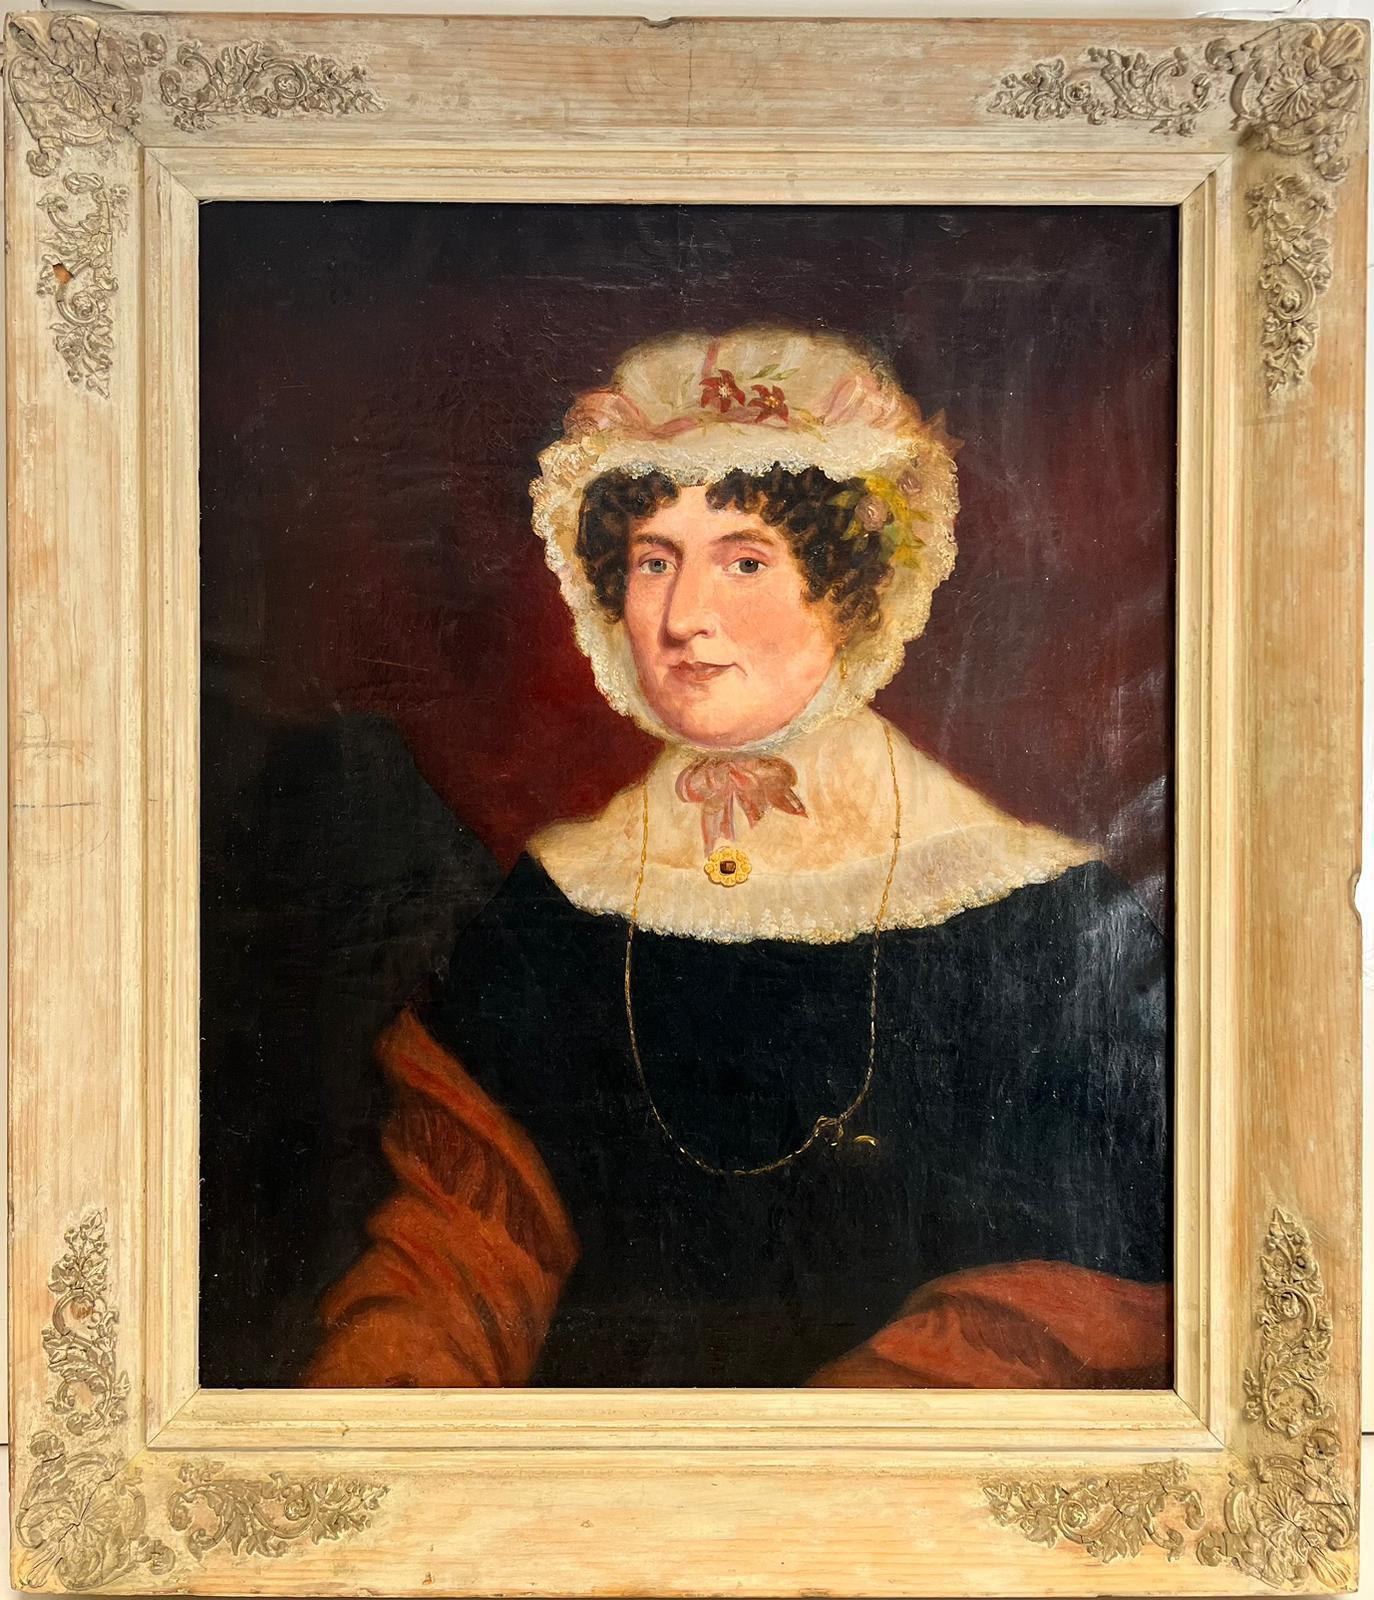 19th Century English School Portrait Painting - 1870’s Victorian English Portrait of Country House Lady Large Oil on Canvas